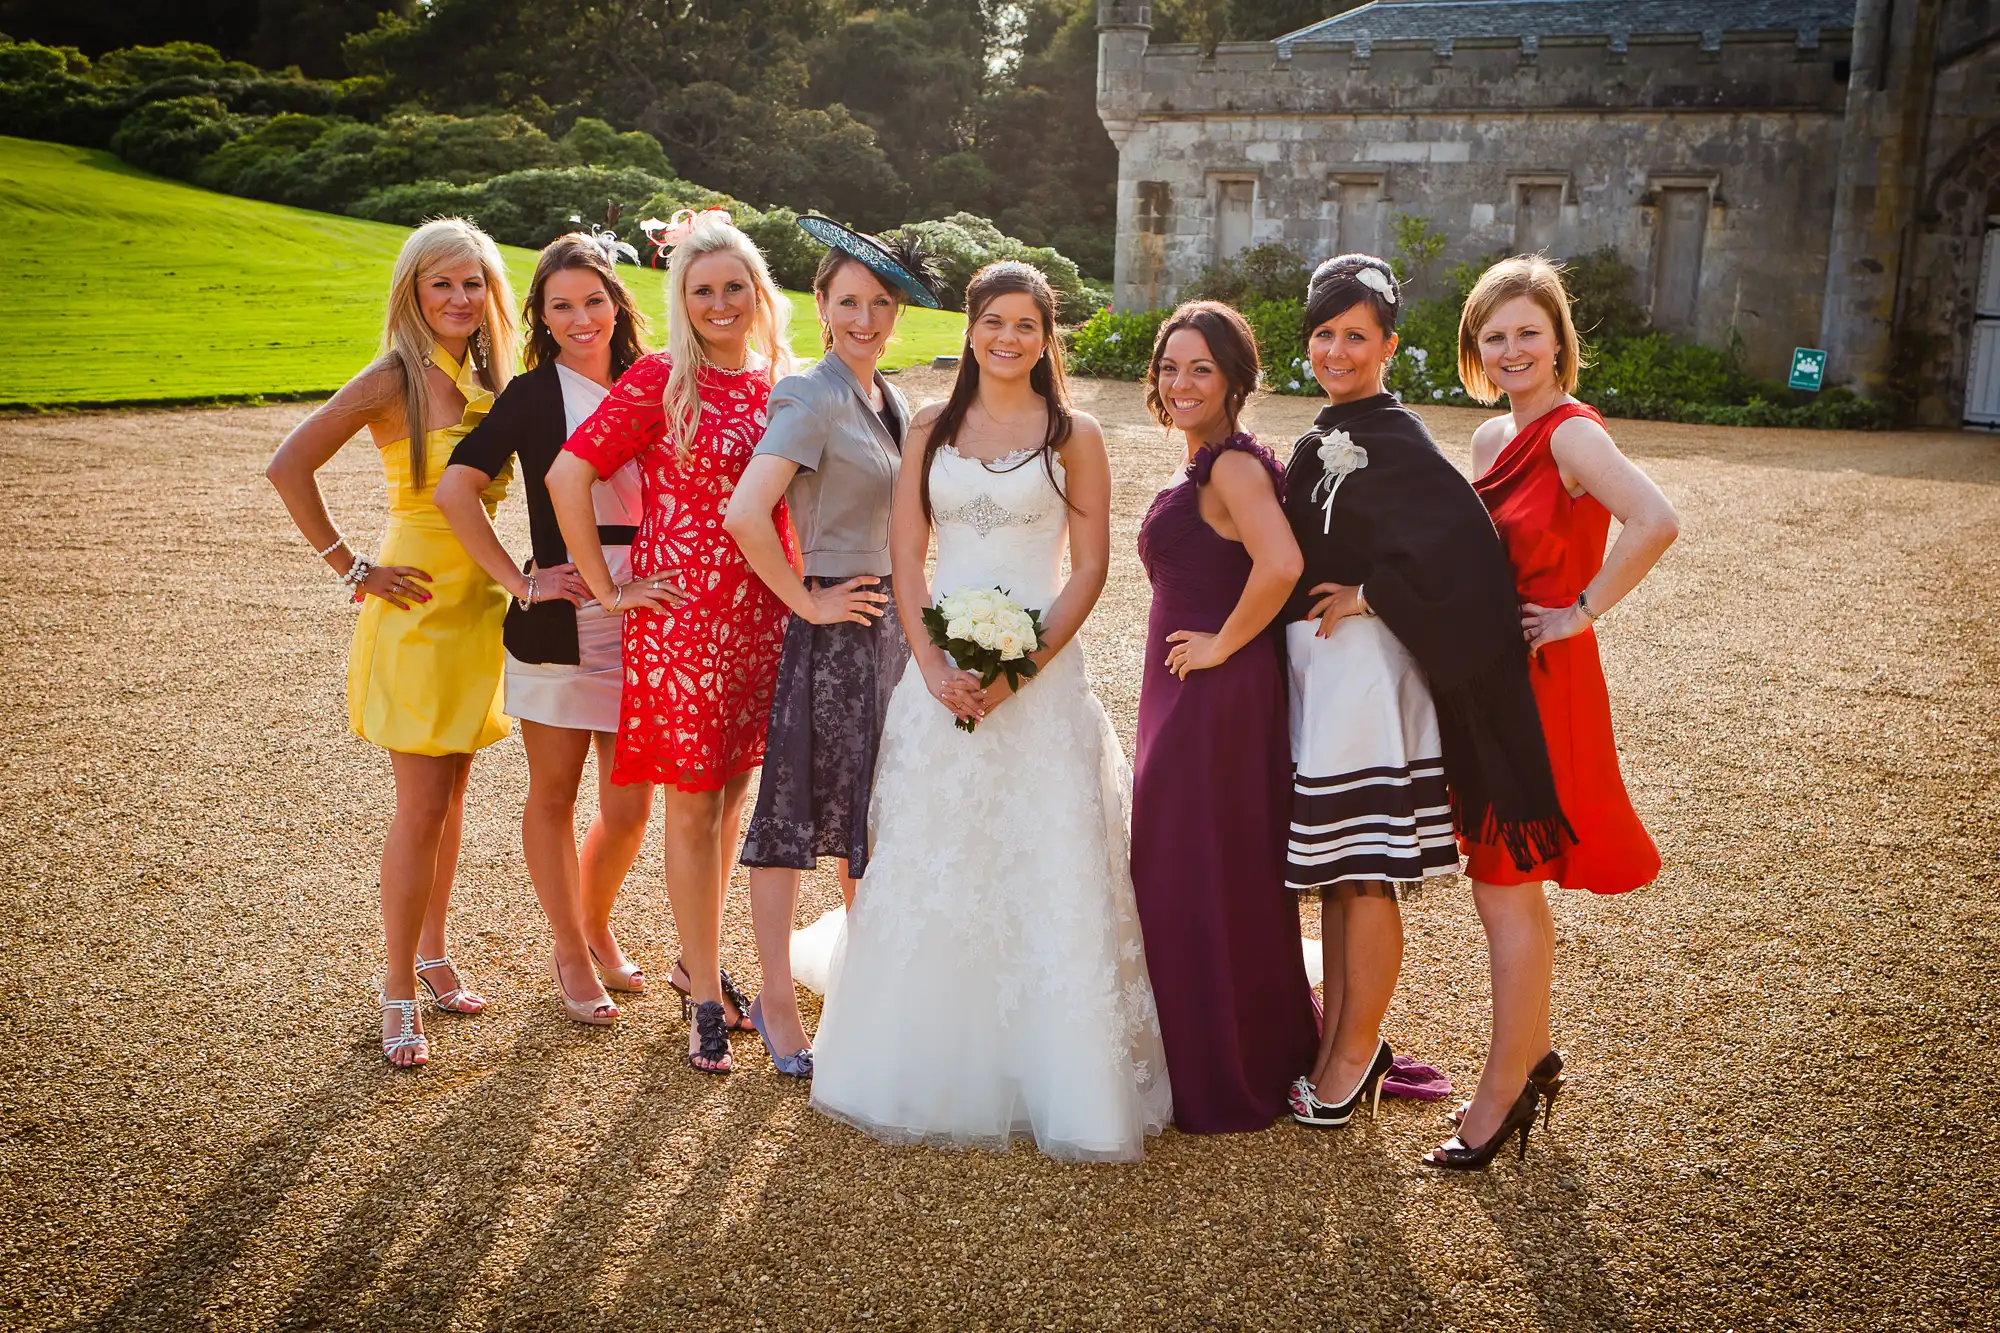 A bride in a white dress with six women in various colorful dresses posing together in front of a stately home on a sunny day.